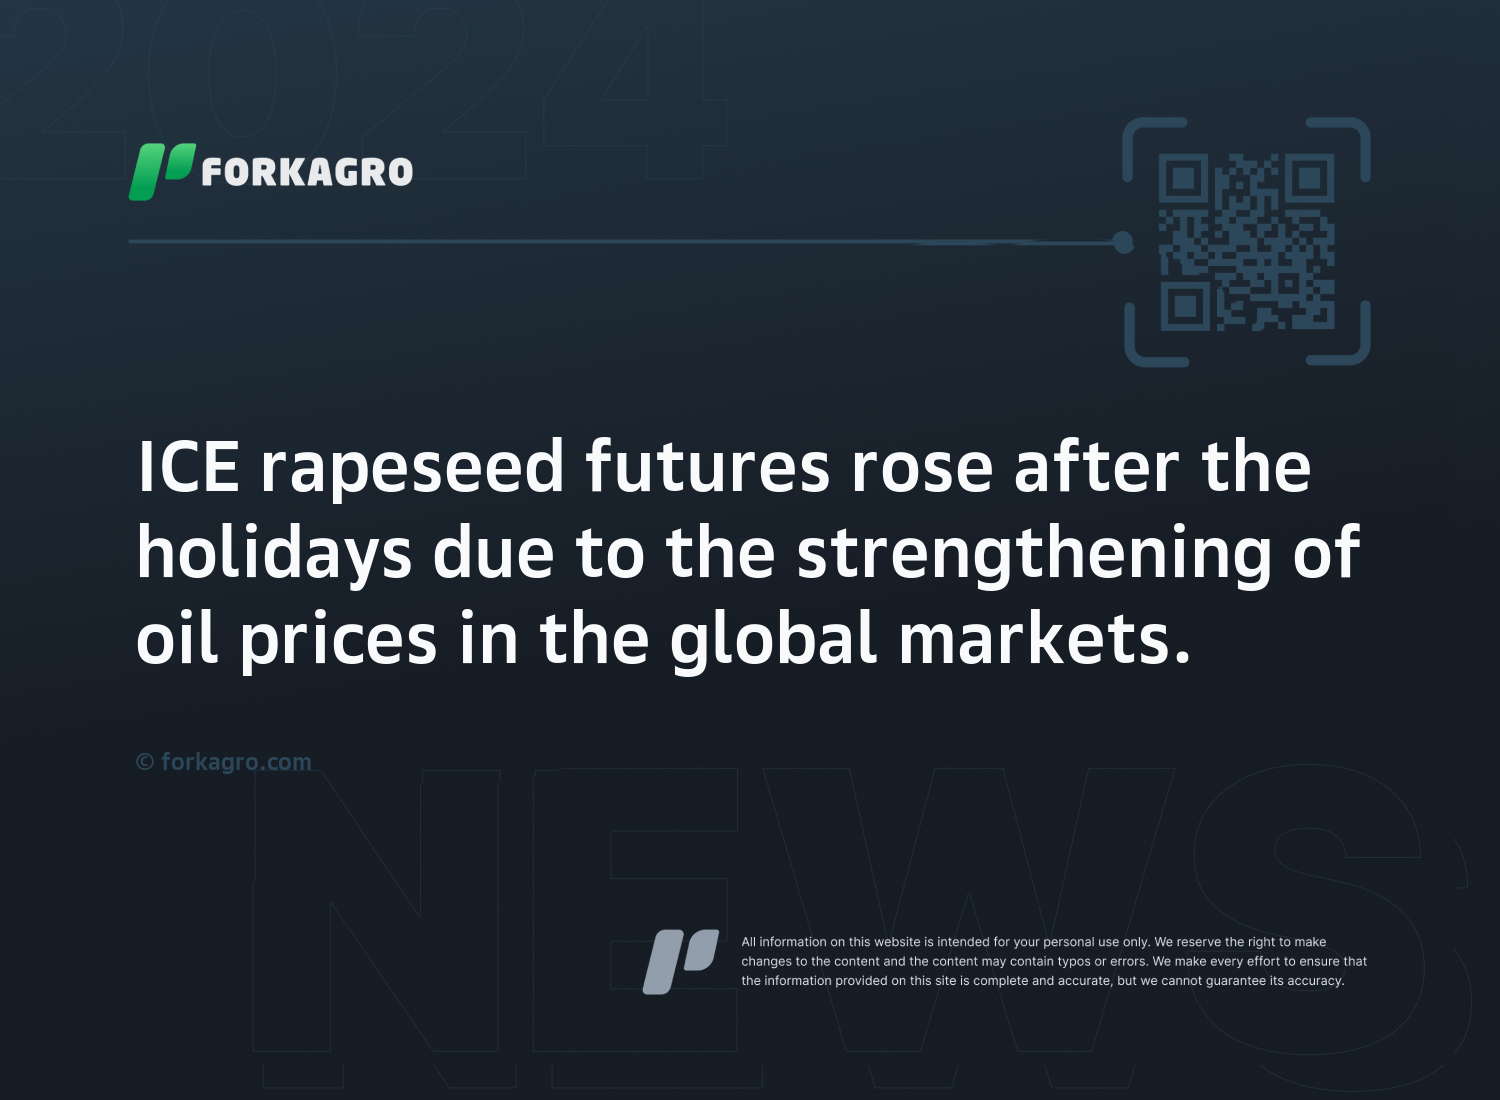 ICE rapeseed futures rose after the holidays due to the strengthening of oil prices in the global markets.